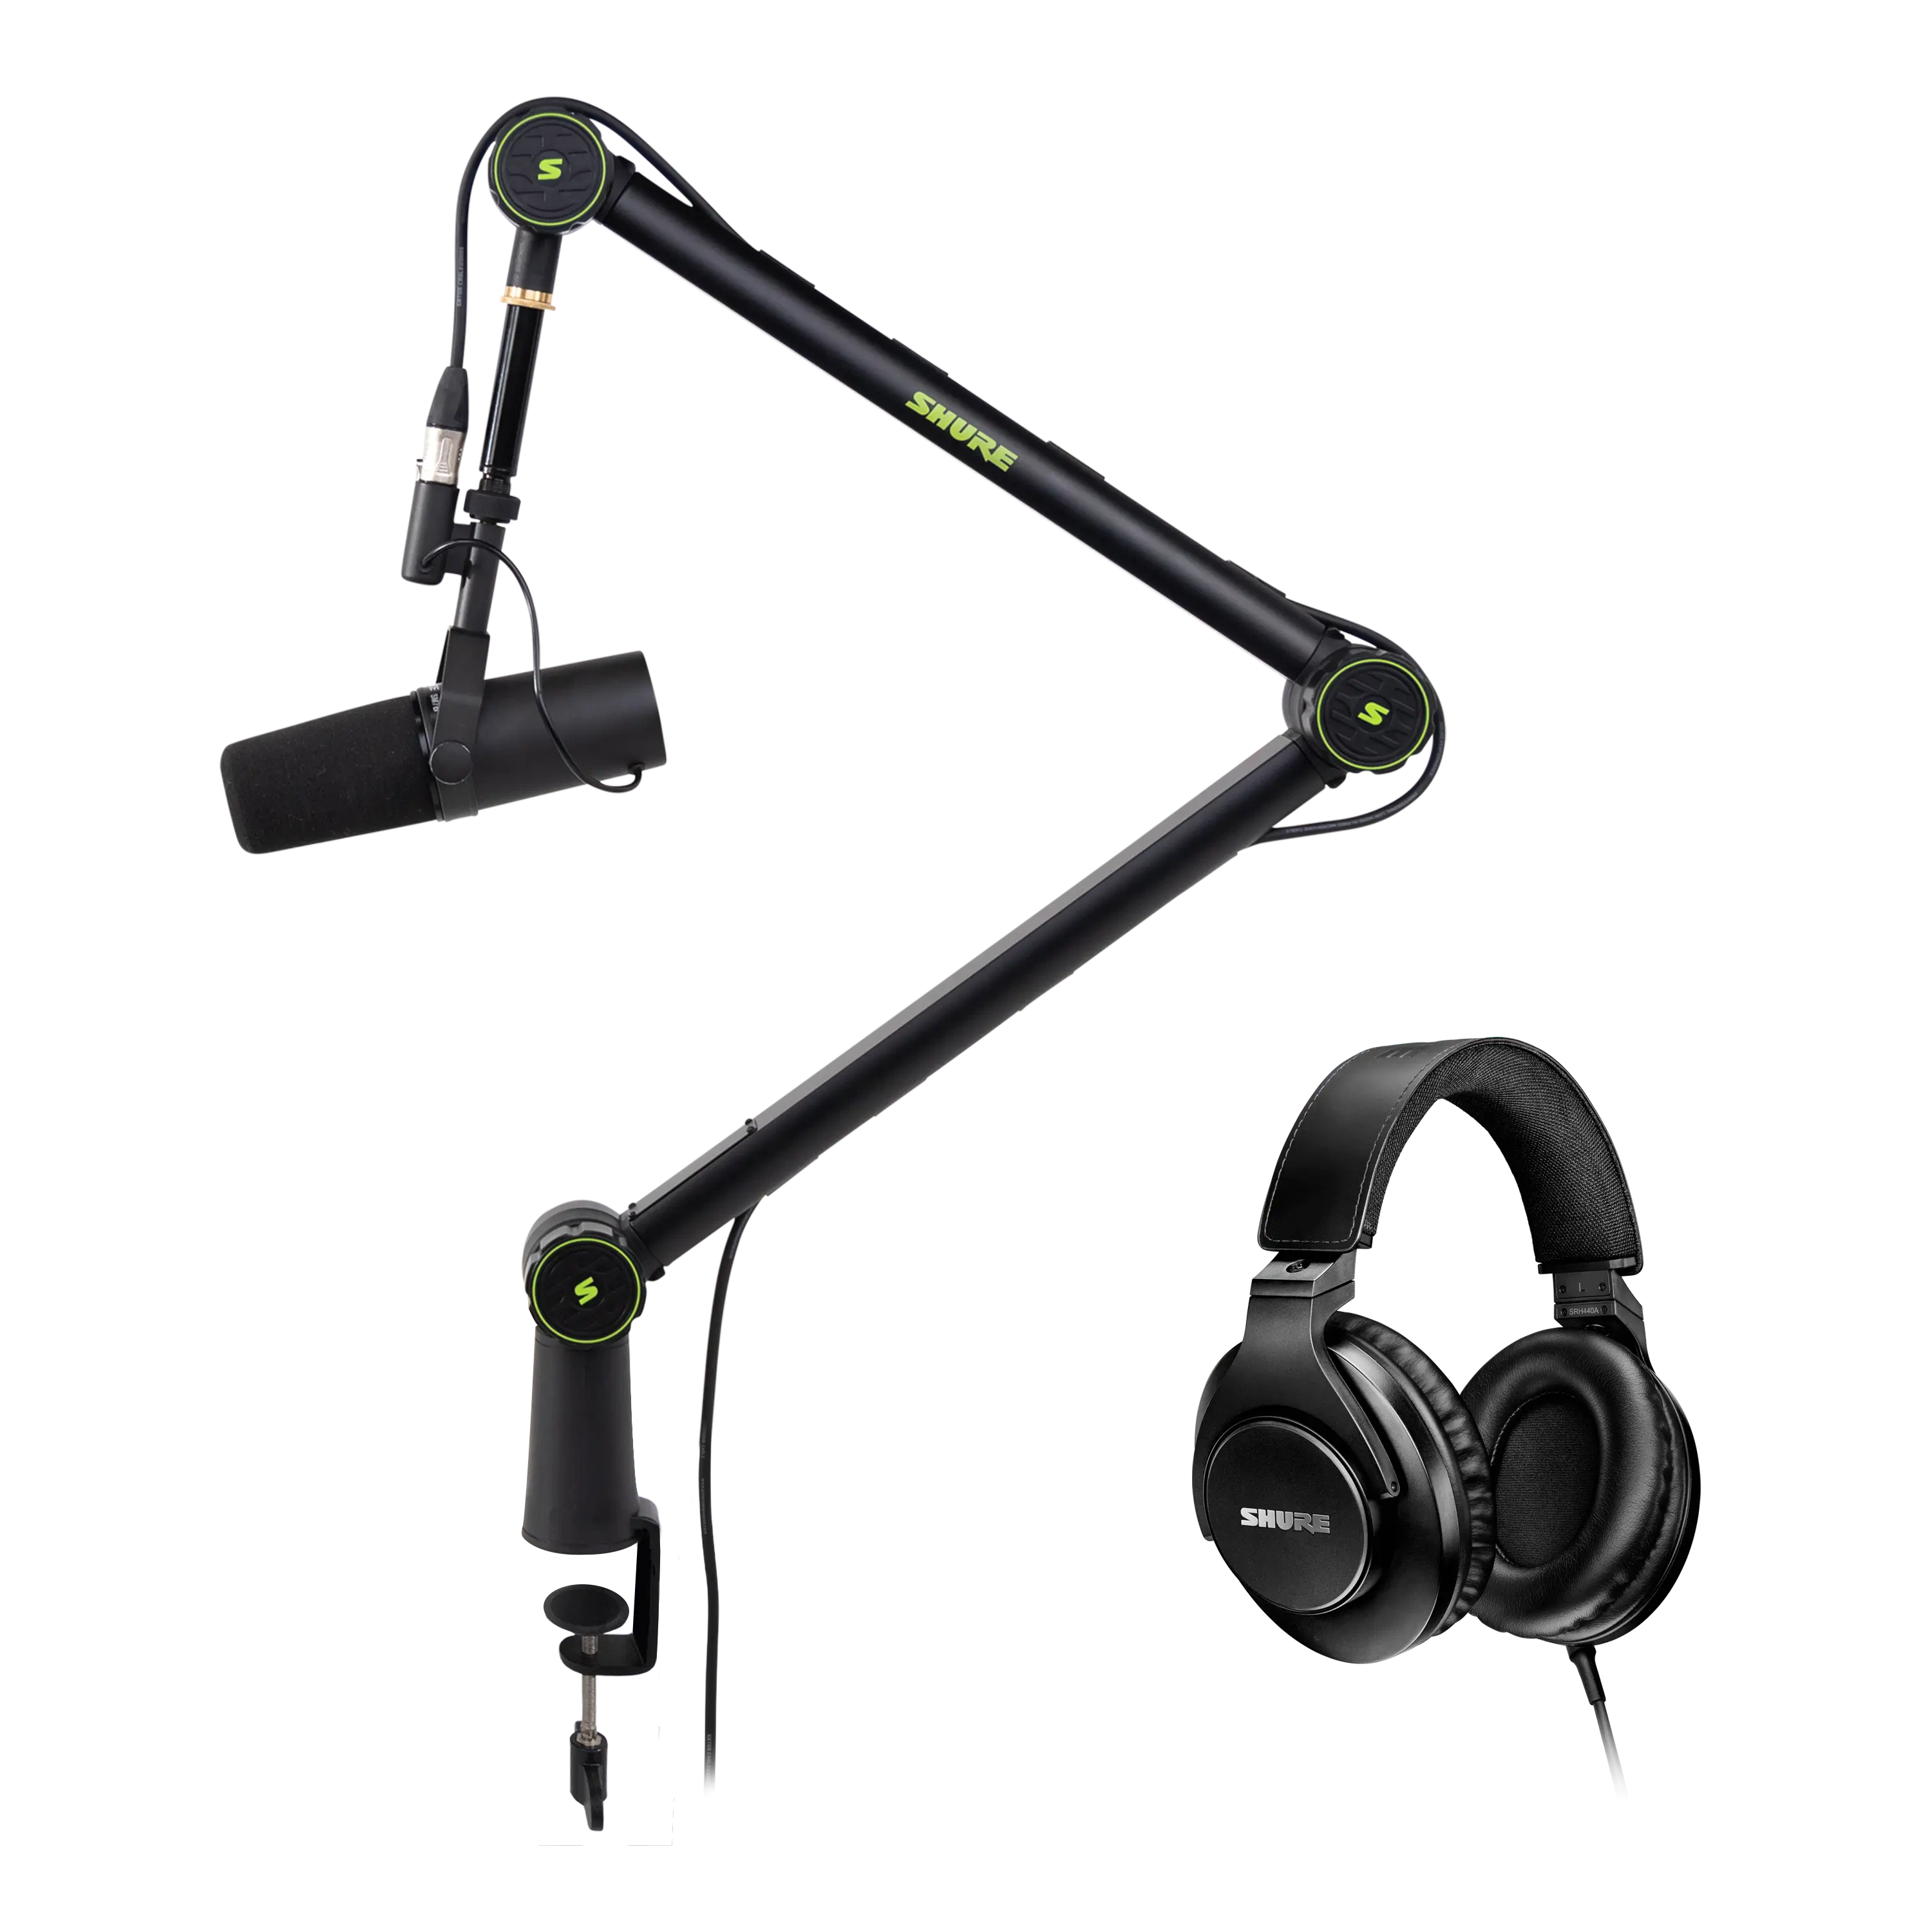 Sm7b + Dt770 Pro 80 ohms Microphone pack with stand Shure